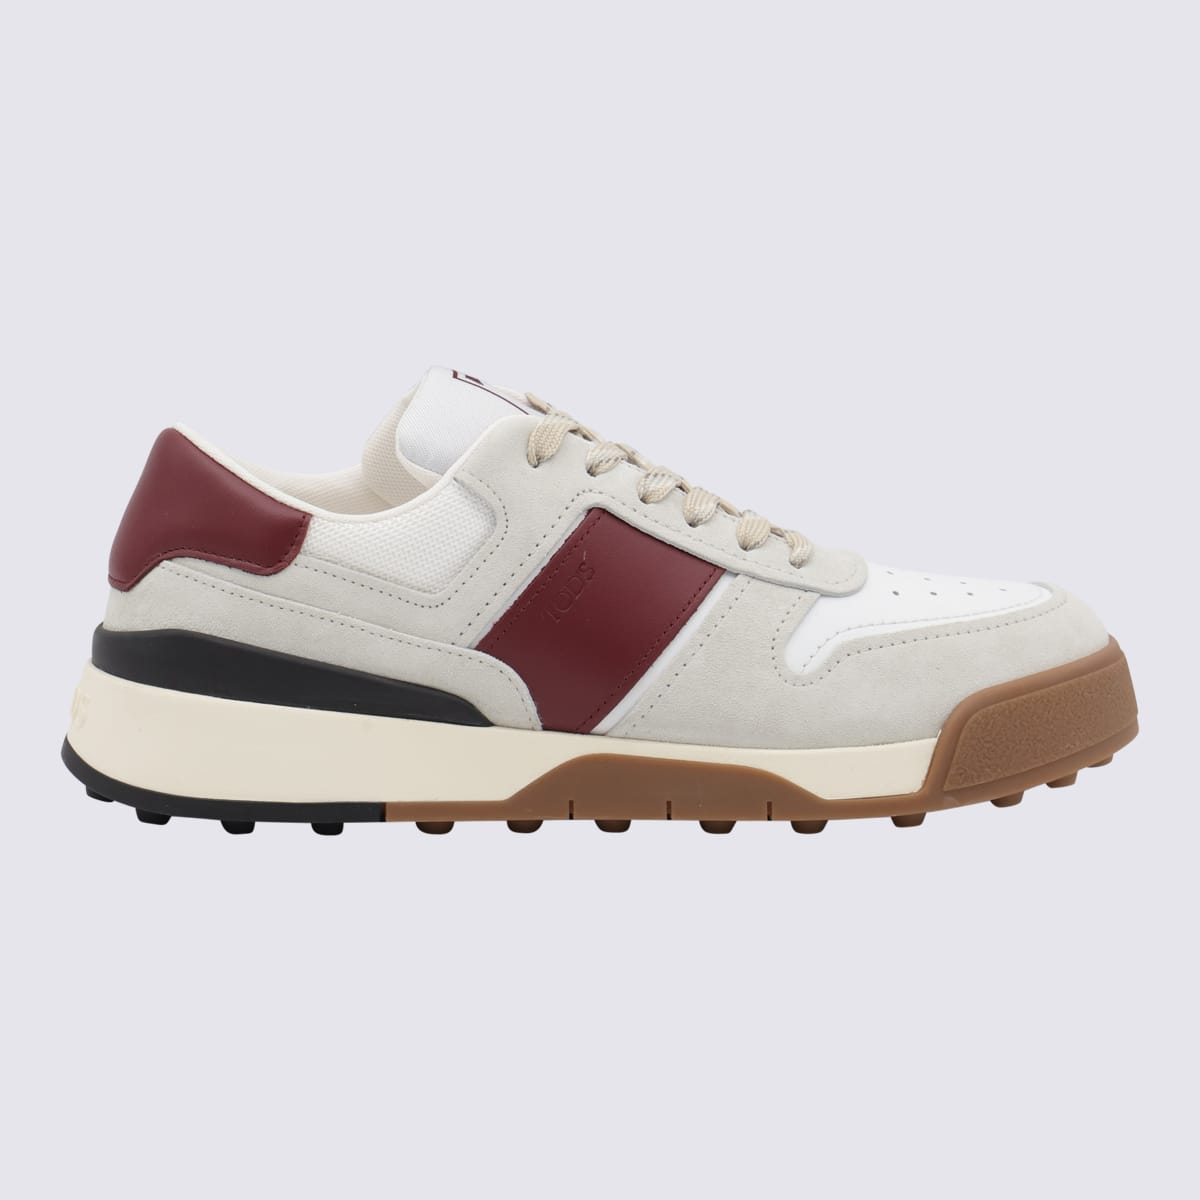 White And Brown Leather Sneakers